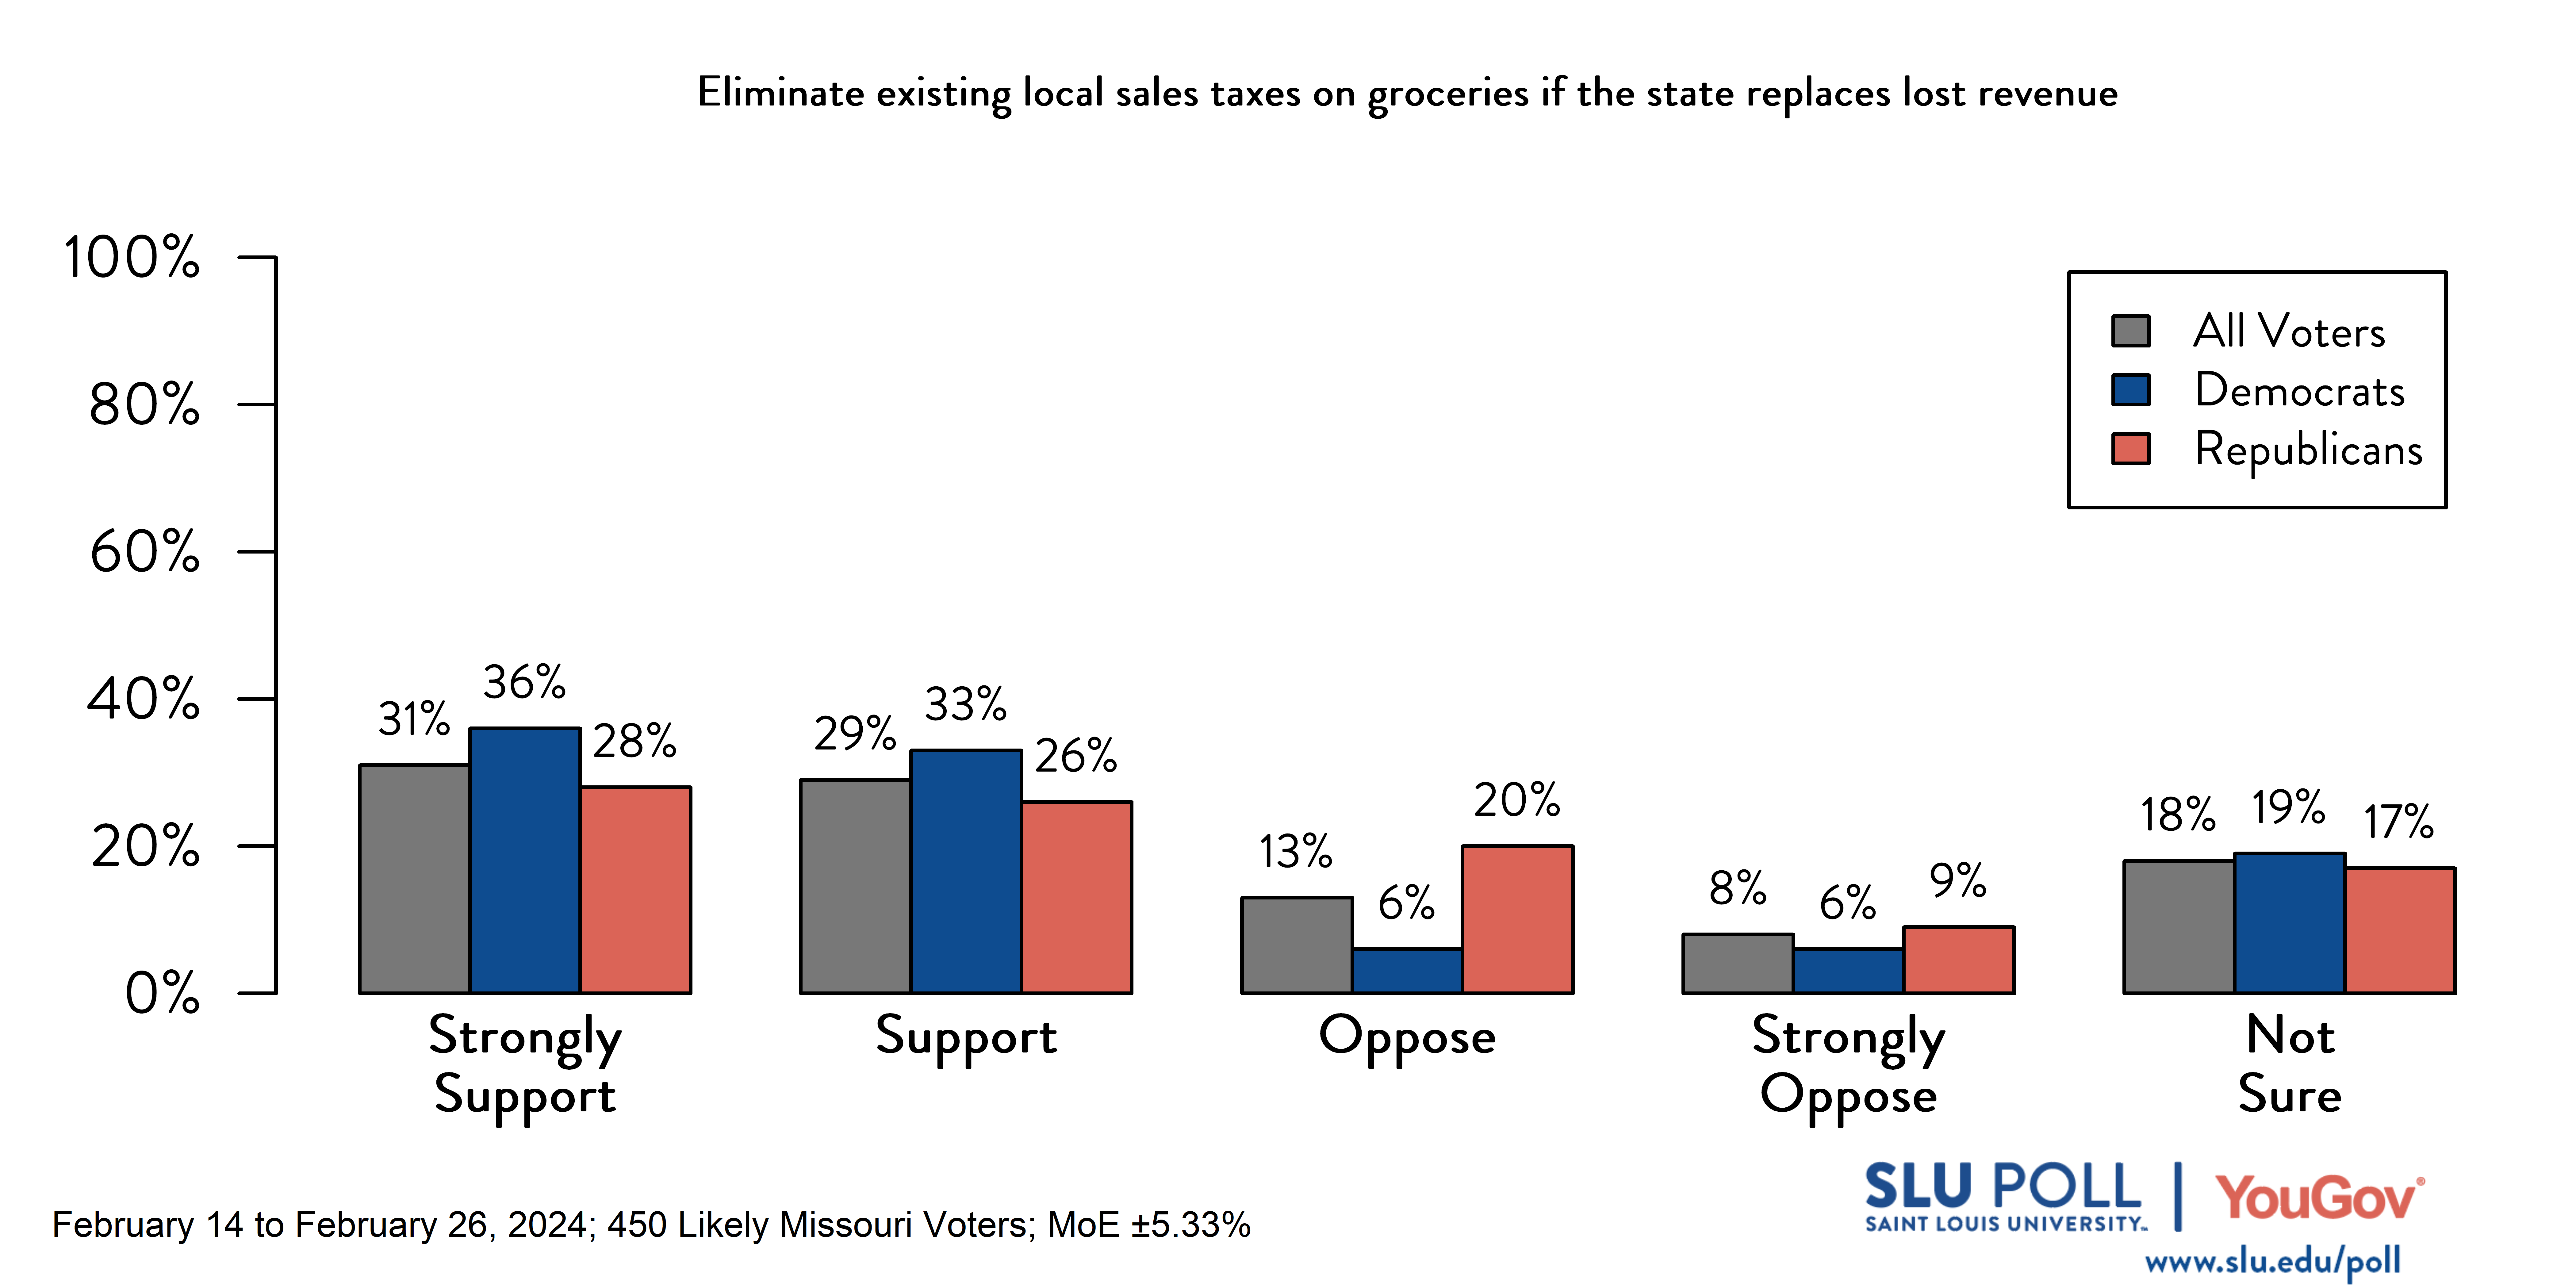 Bar graph of SLU/YouGov Poll results for local groceries tax reimbursement question. Results in caption